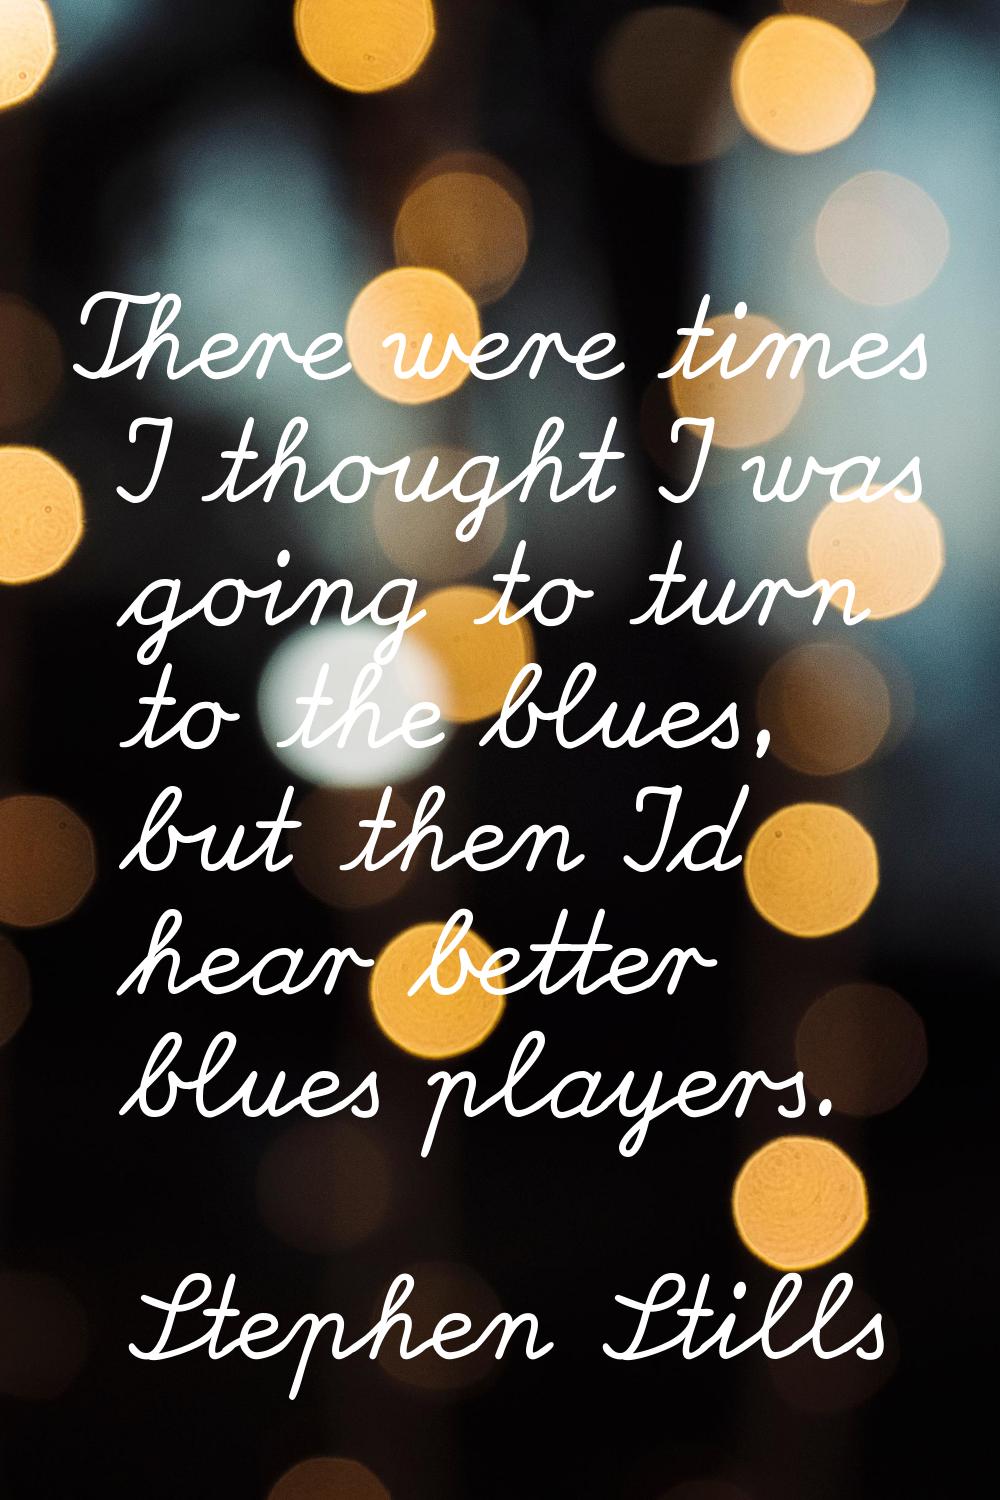 There were times I thought I was going to turn to the blues, but then I'd hear better blues players